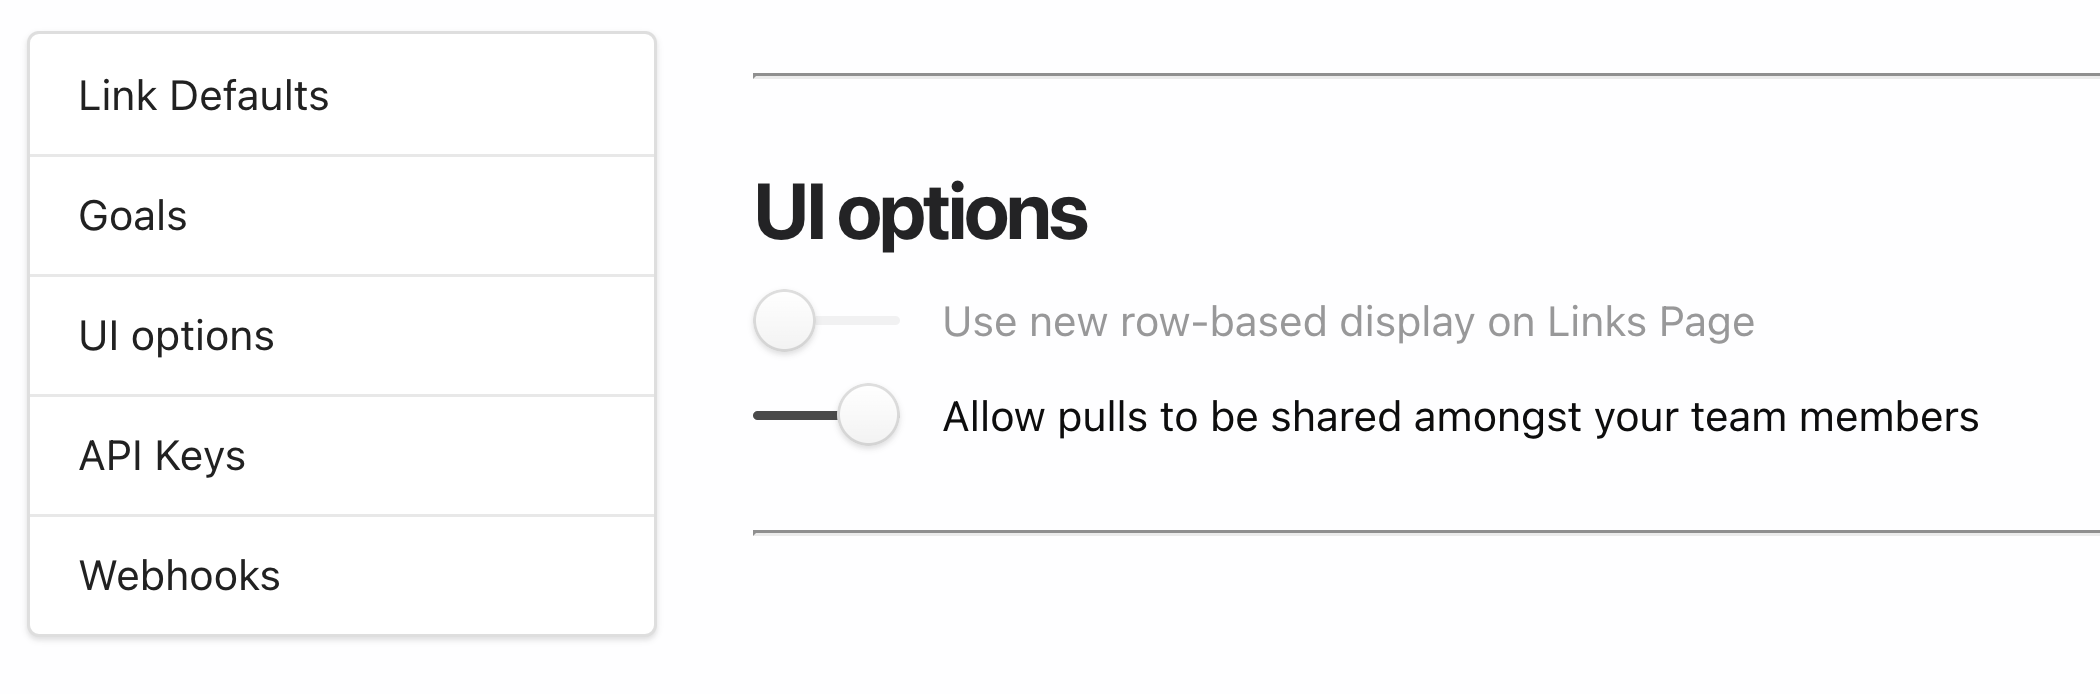 Toggle on the sharing option in Administrator settings